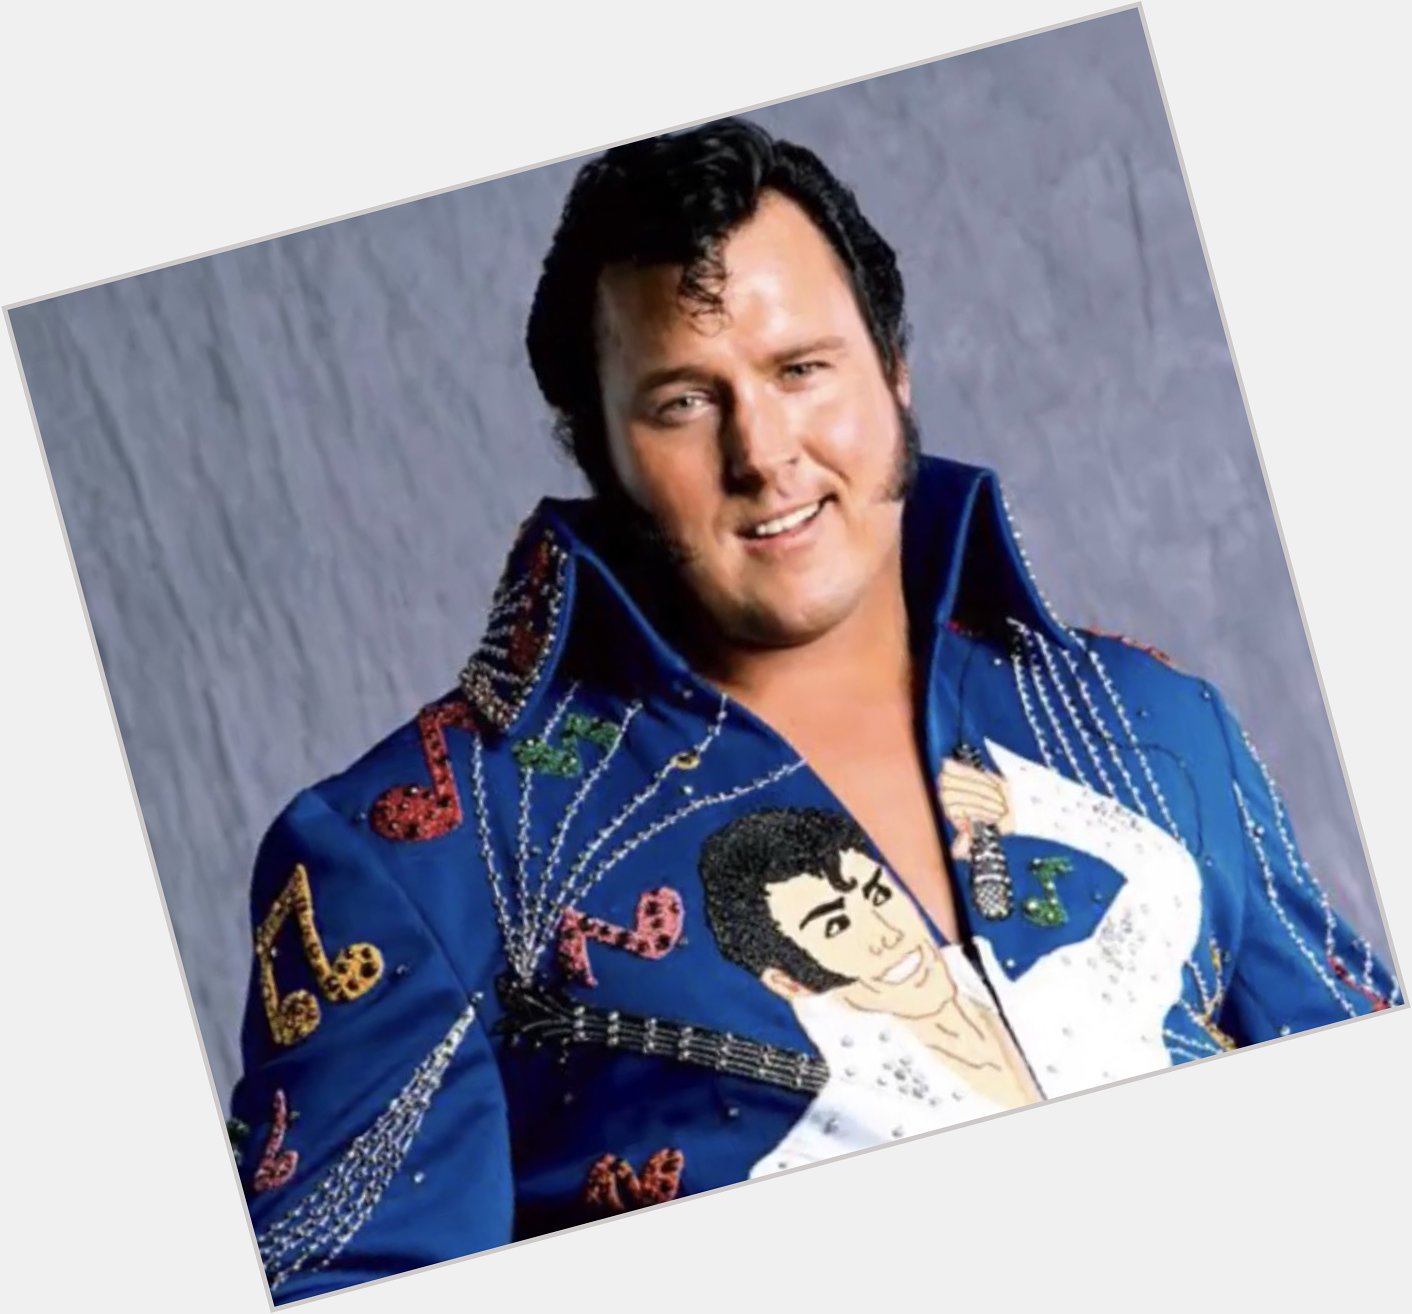 Happy Birthday The Honky Tonk Man who is 70 years old today!  